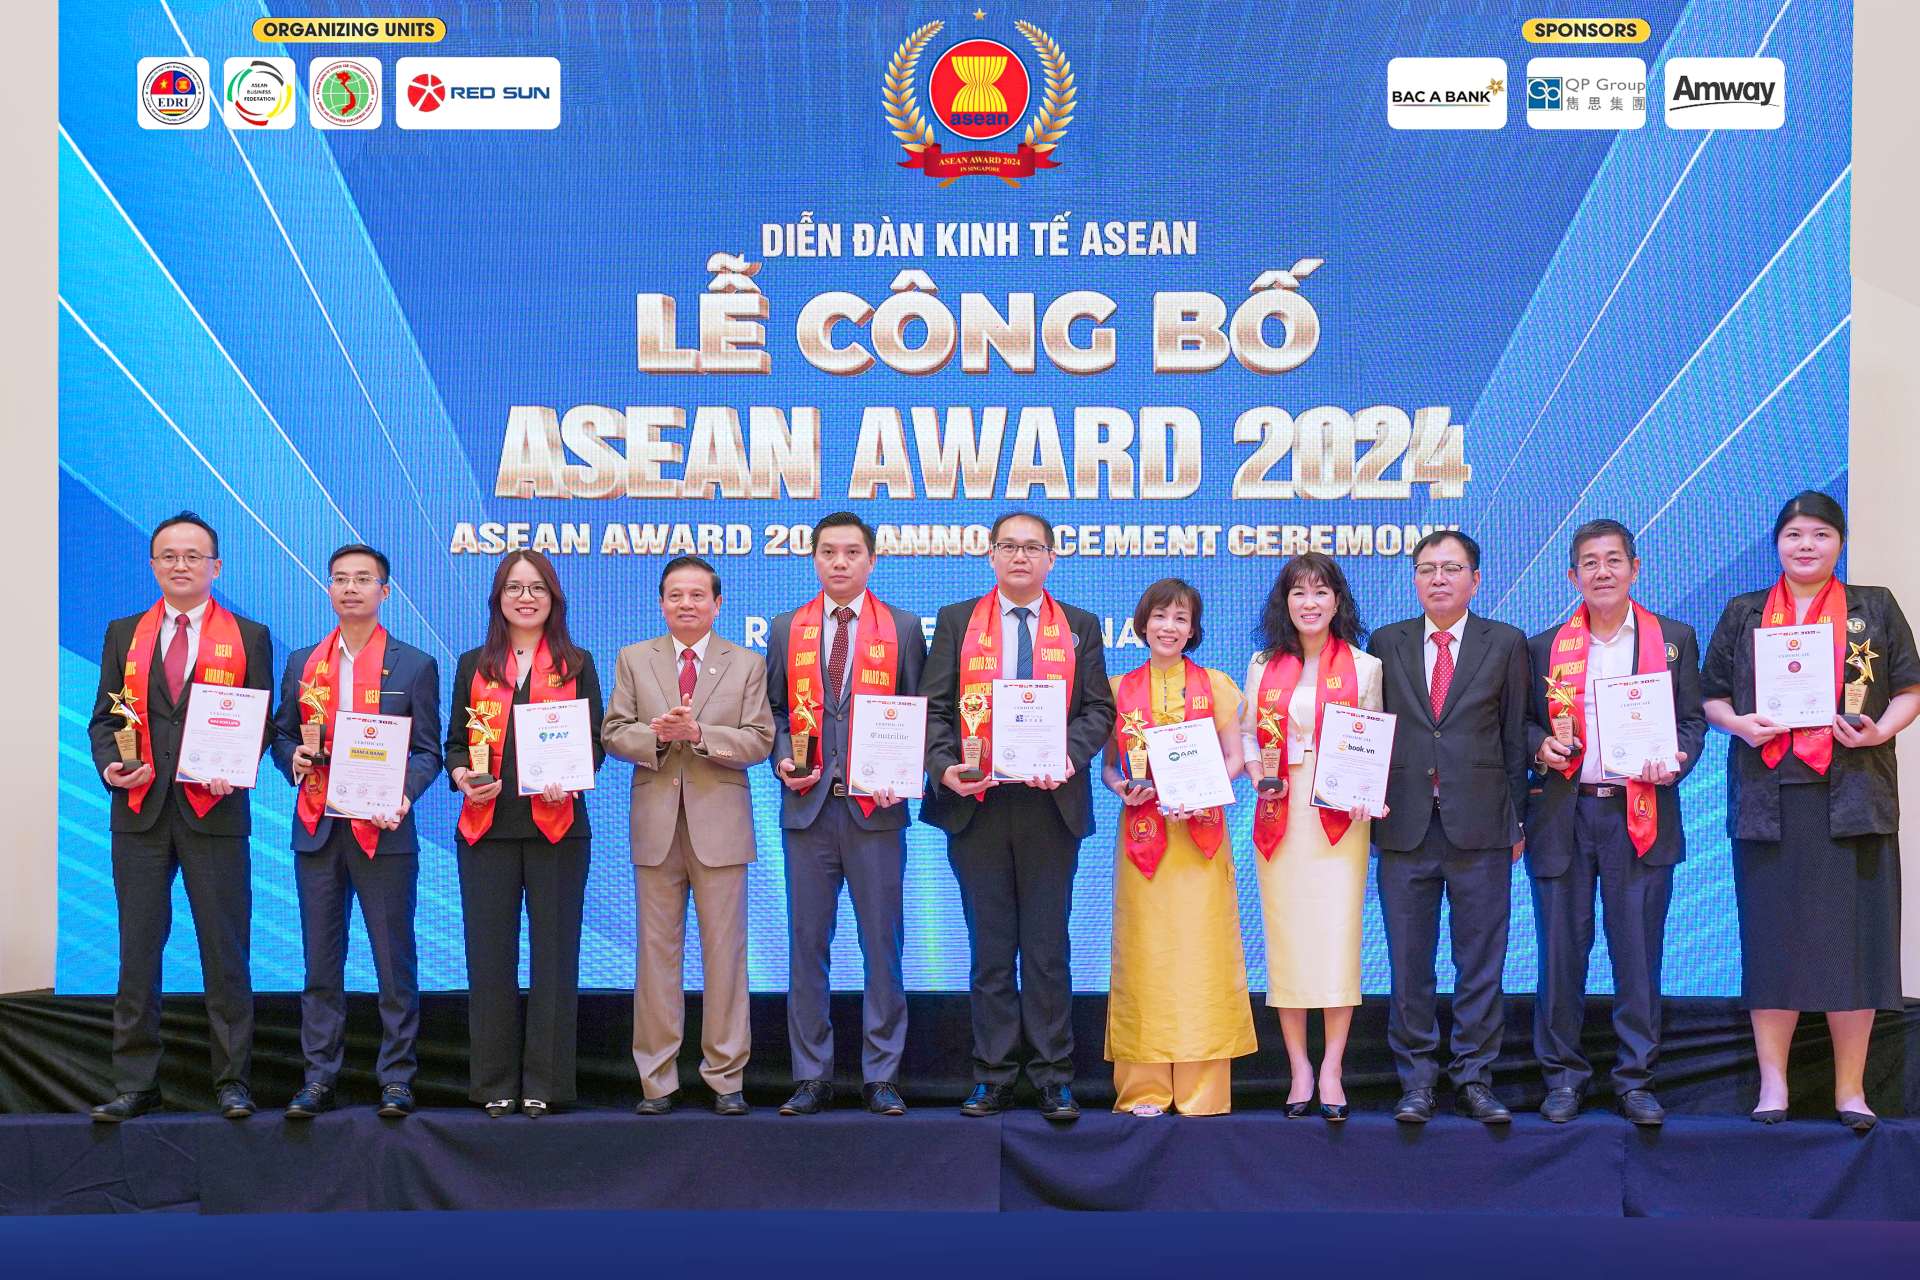 9pay-acclaimed-as-top-asean-enterprises-and-favorite-payment-channel-in-vietnam